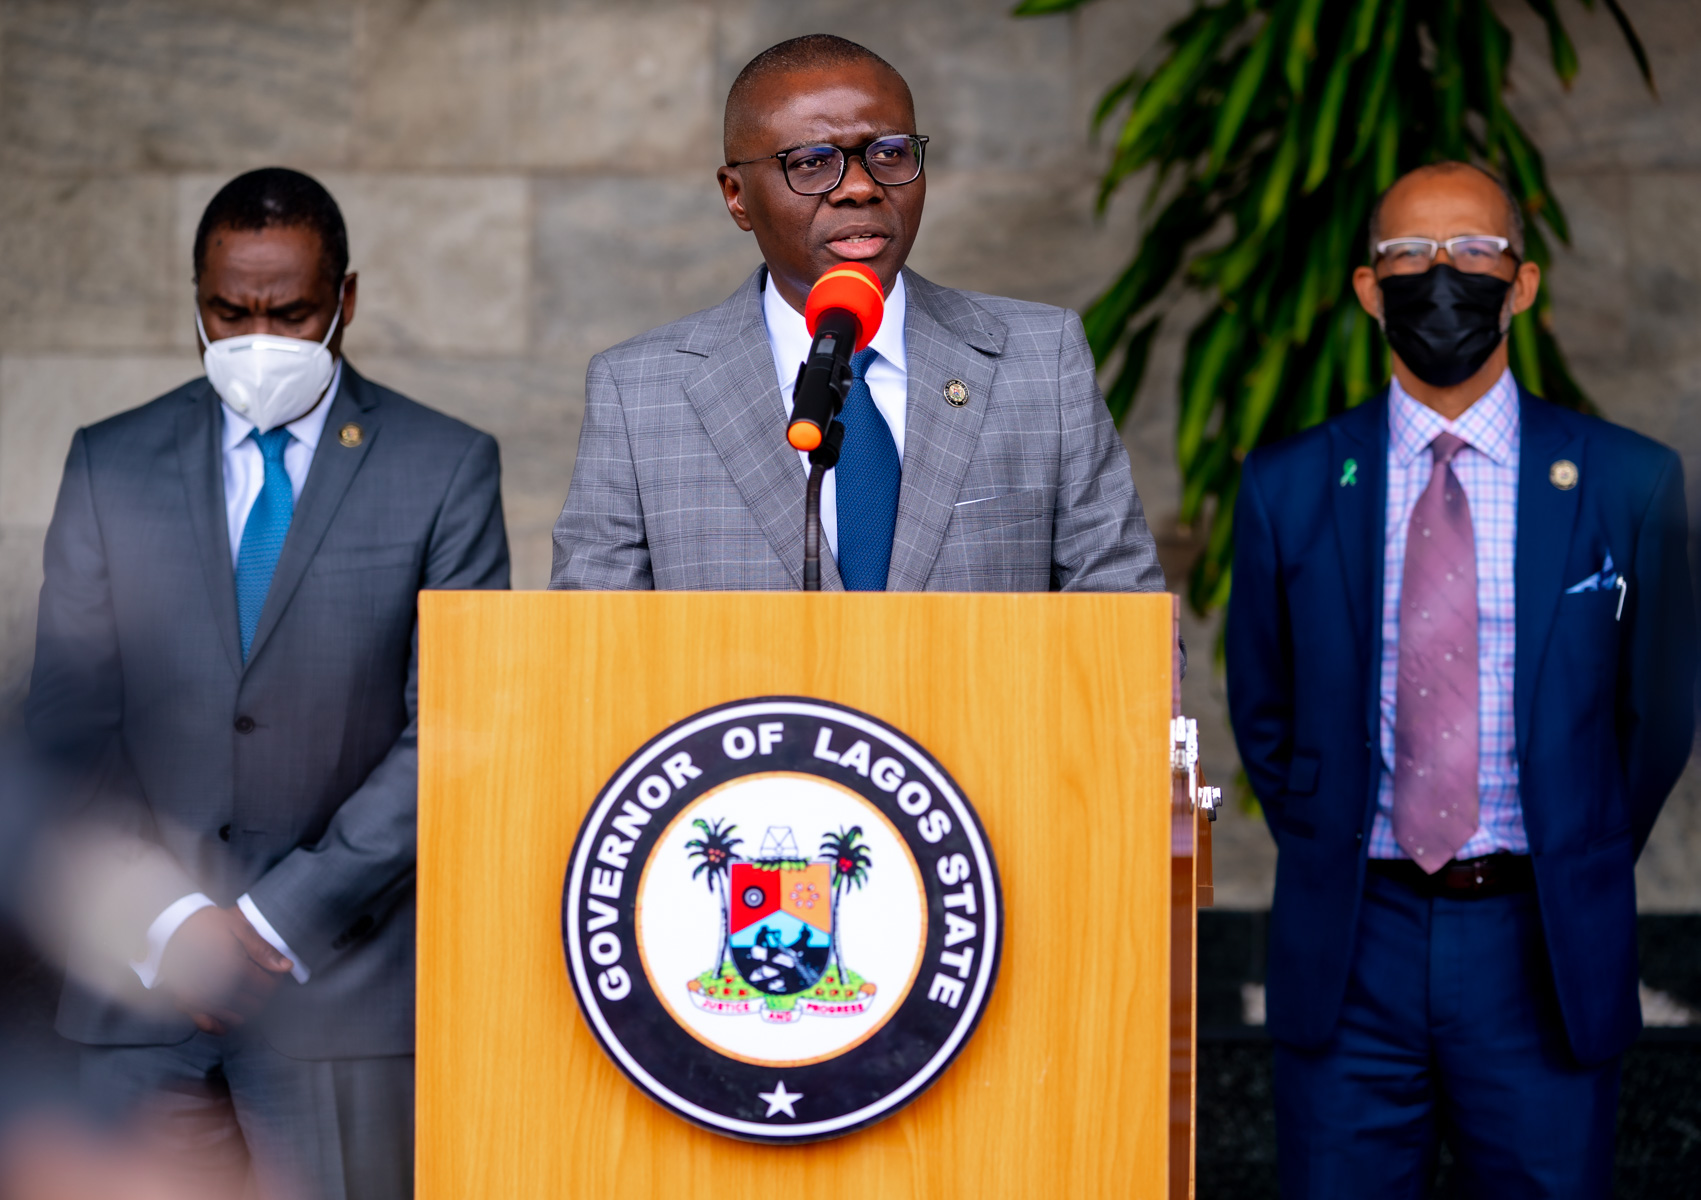 COVID-19: WE’VE RECORDED 135 DEATHS IN THIRD WAVE, AS PANDEMIC CASES RISE IN LAGOS – SANWO-OLU